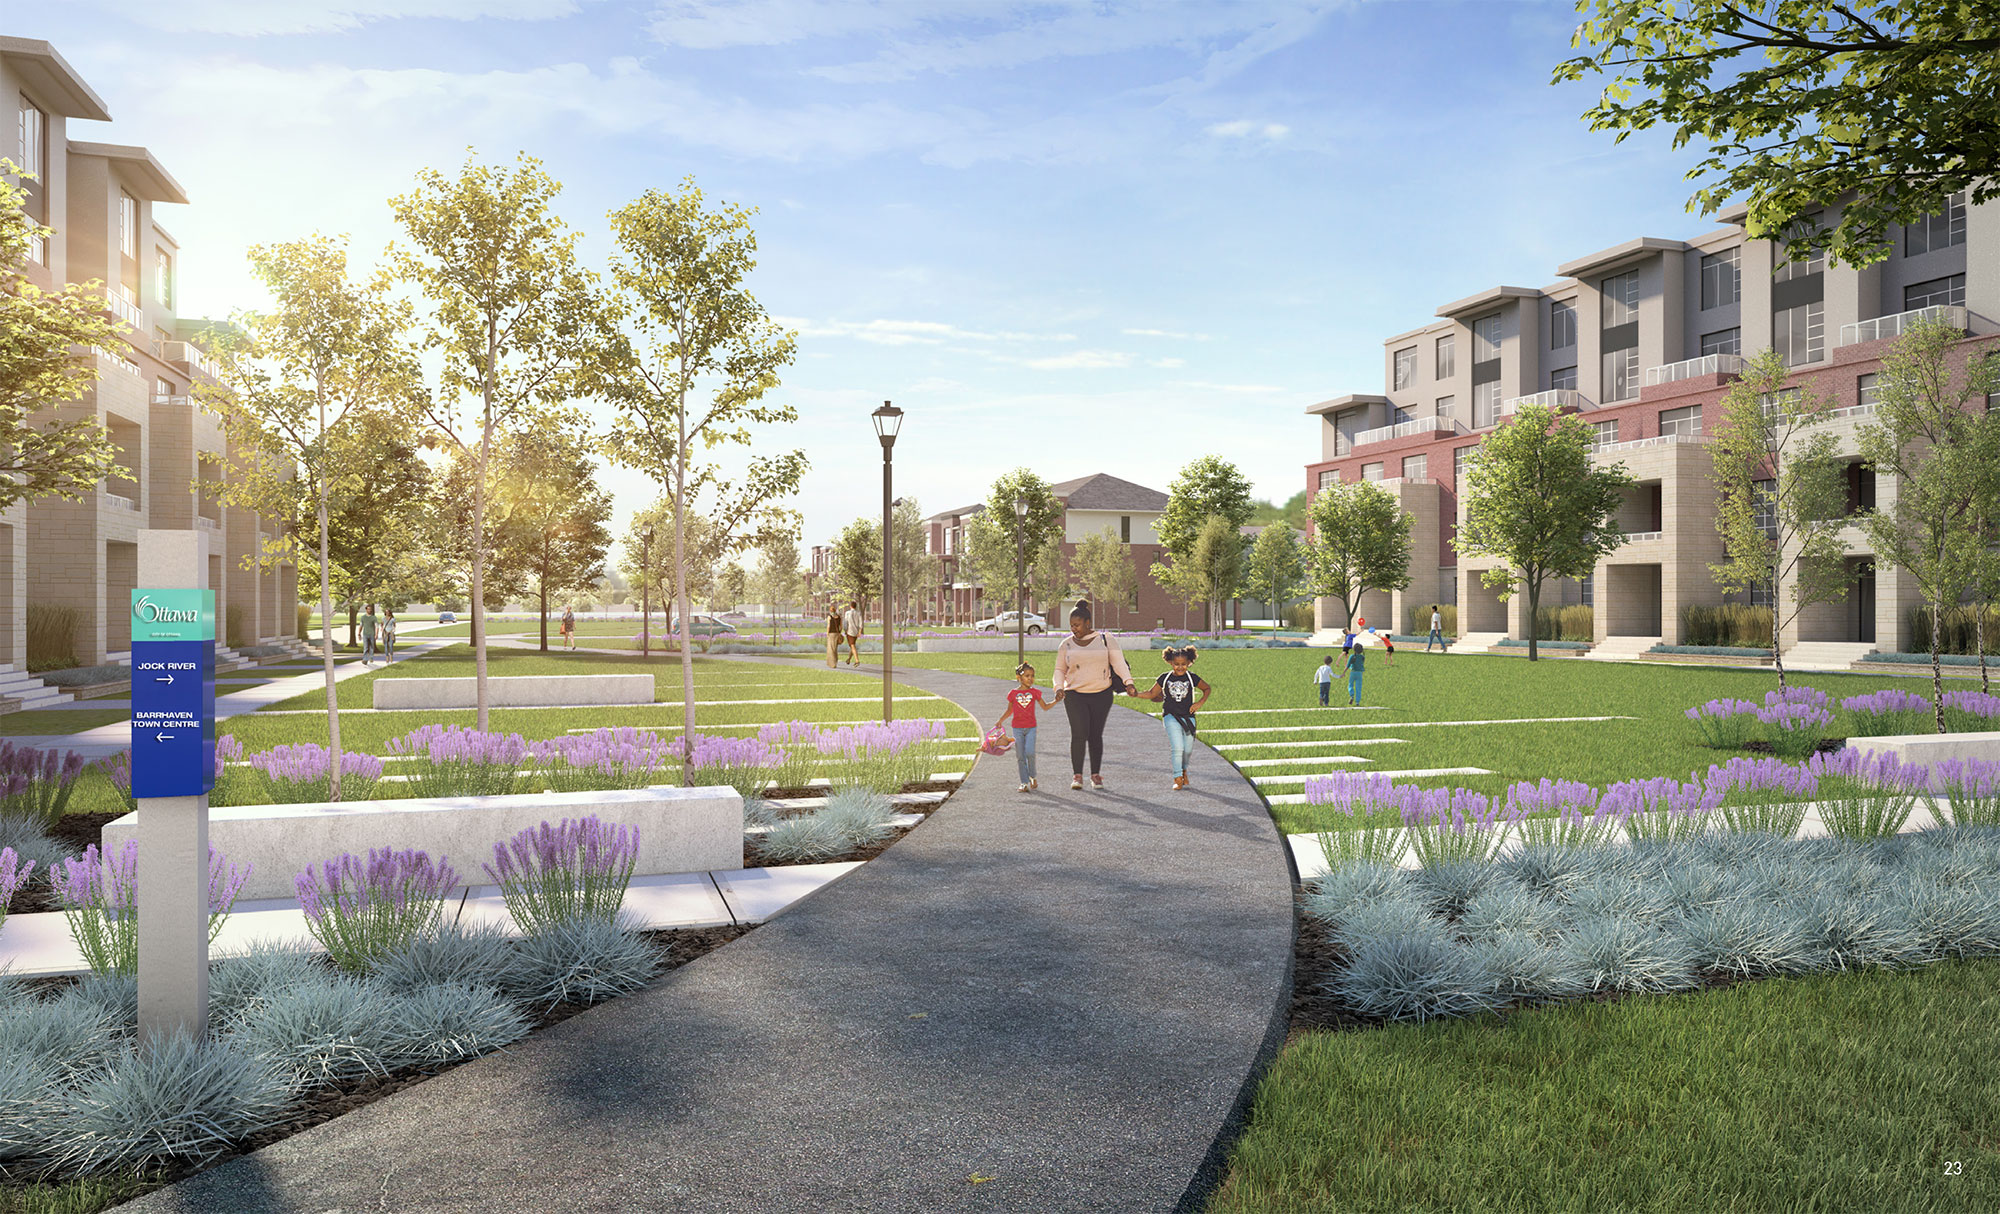 Rendering of propsed linear park in Downtown Barrhaven.